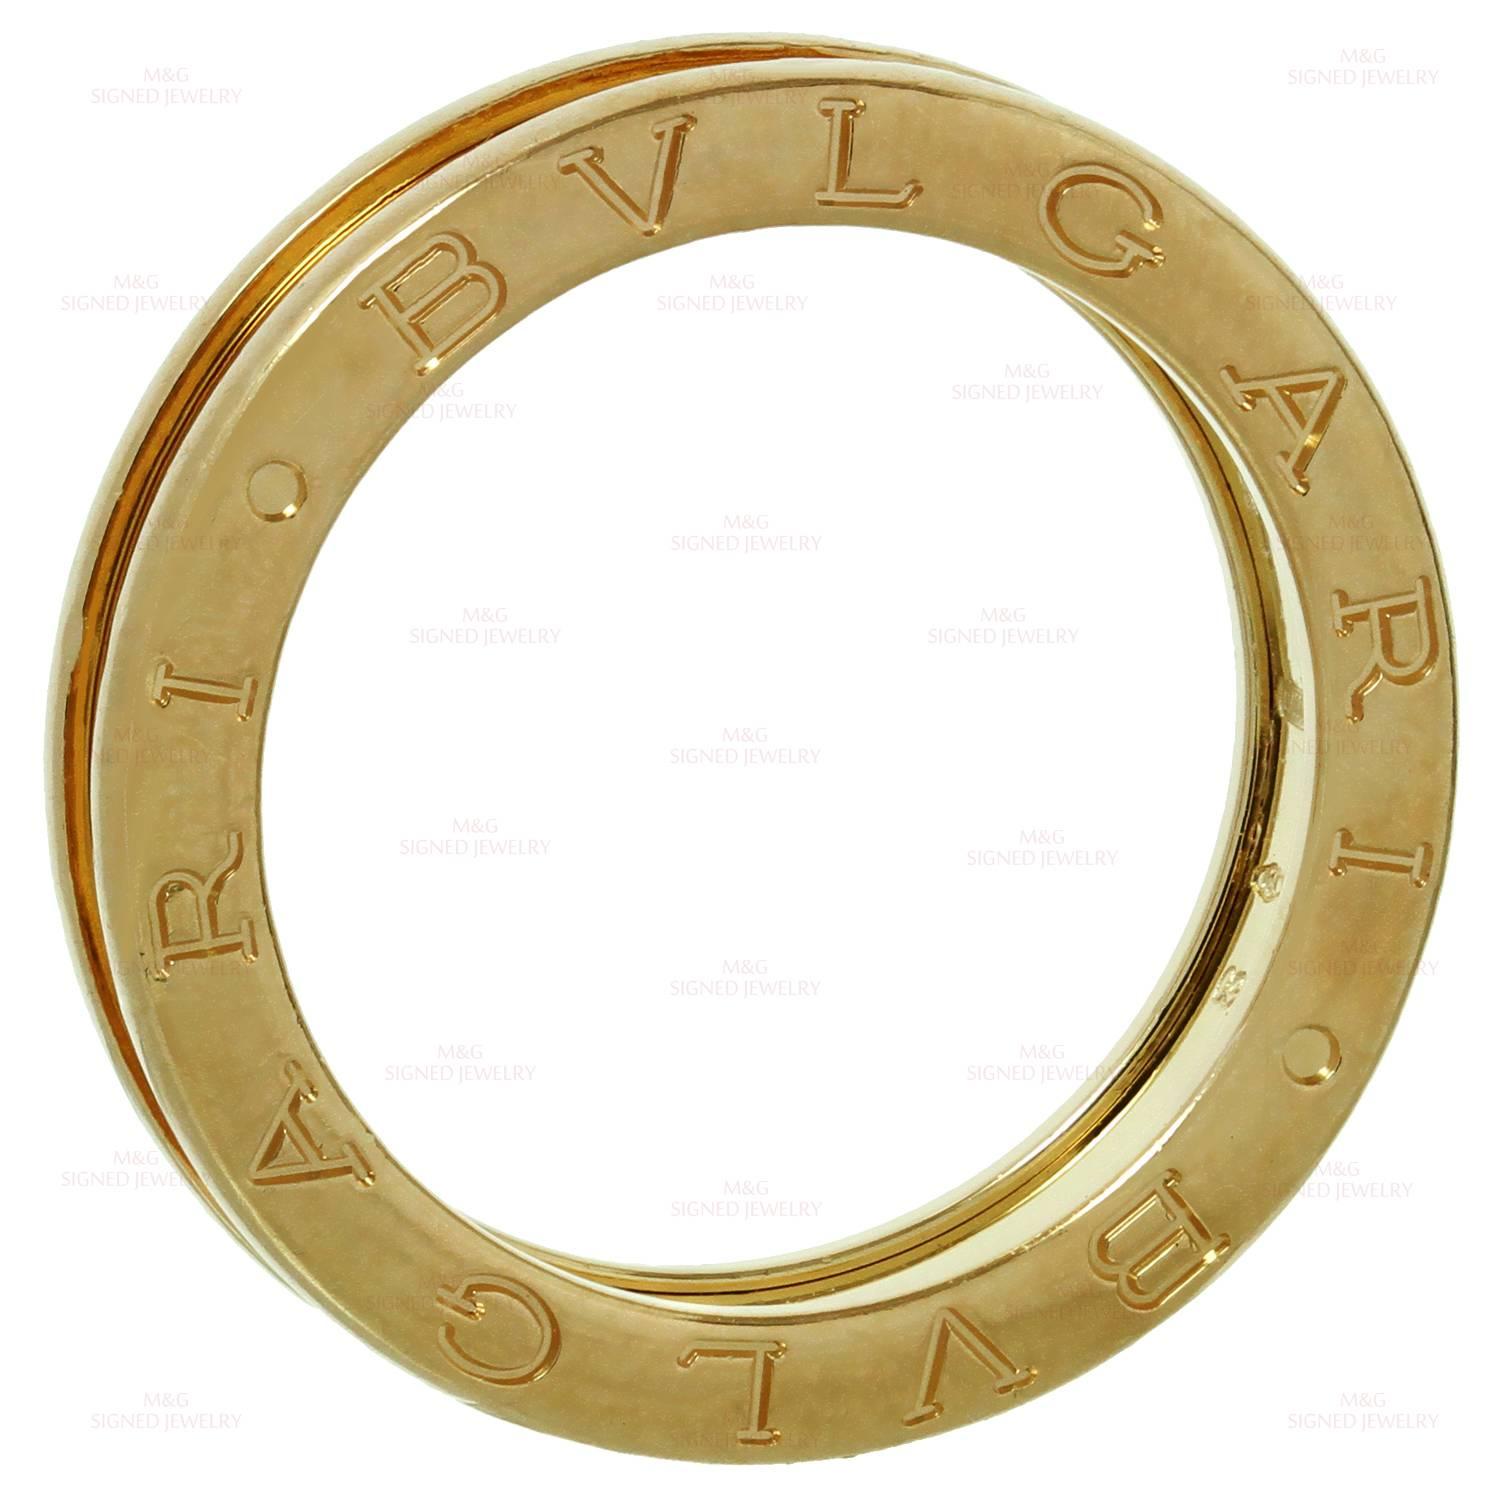 This unisex ring from Bulgari's iconic B.zero1 collection is crafted in 18k rose gold and features the single band design engraved with the Bvlgari logo on both sides. Made in Italy circa 2010s. Measurements: 0.19" (5mm) width. The ring size is